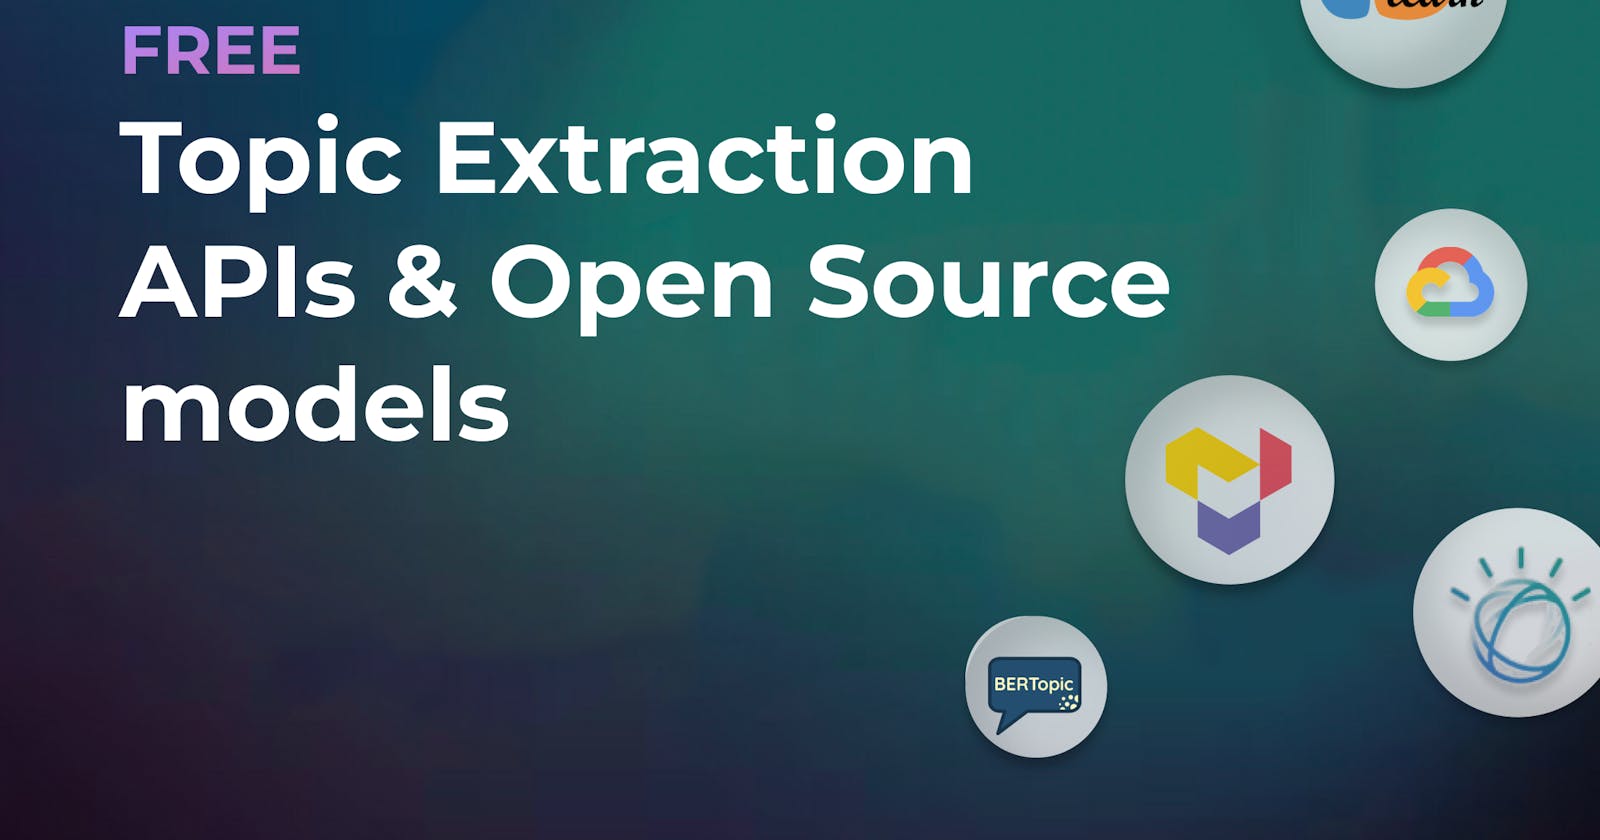 Top Free Topic/Entity Extraction tools, APIs, and Open Source models